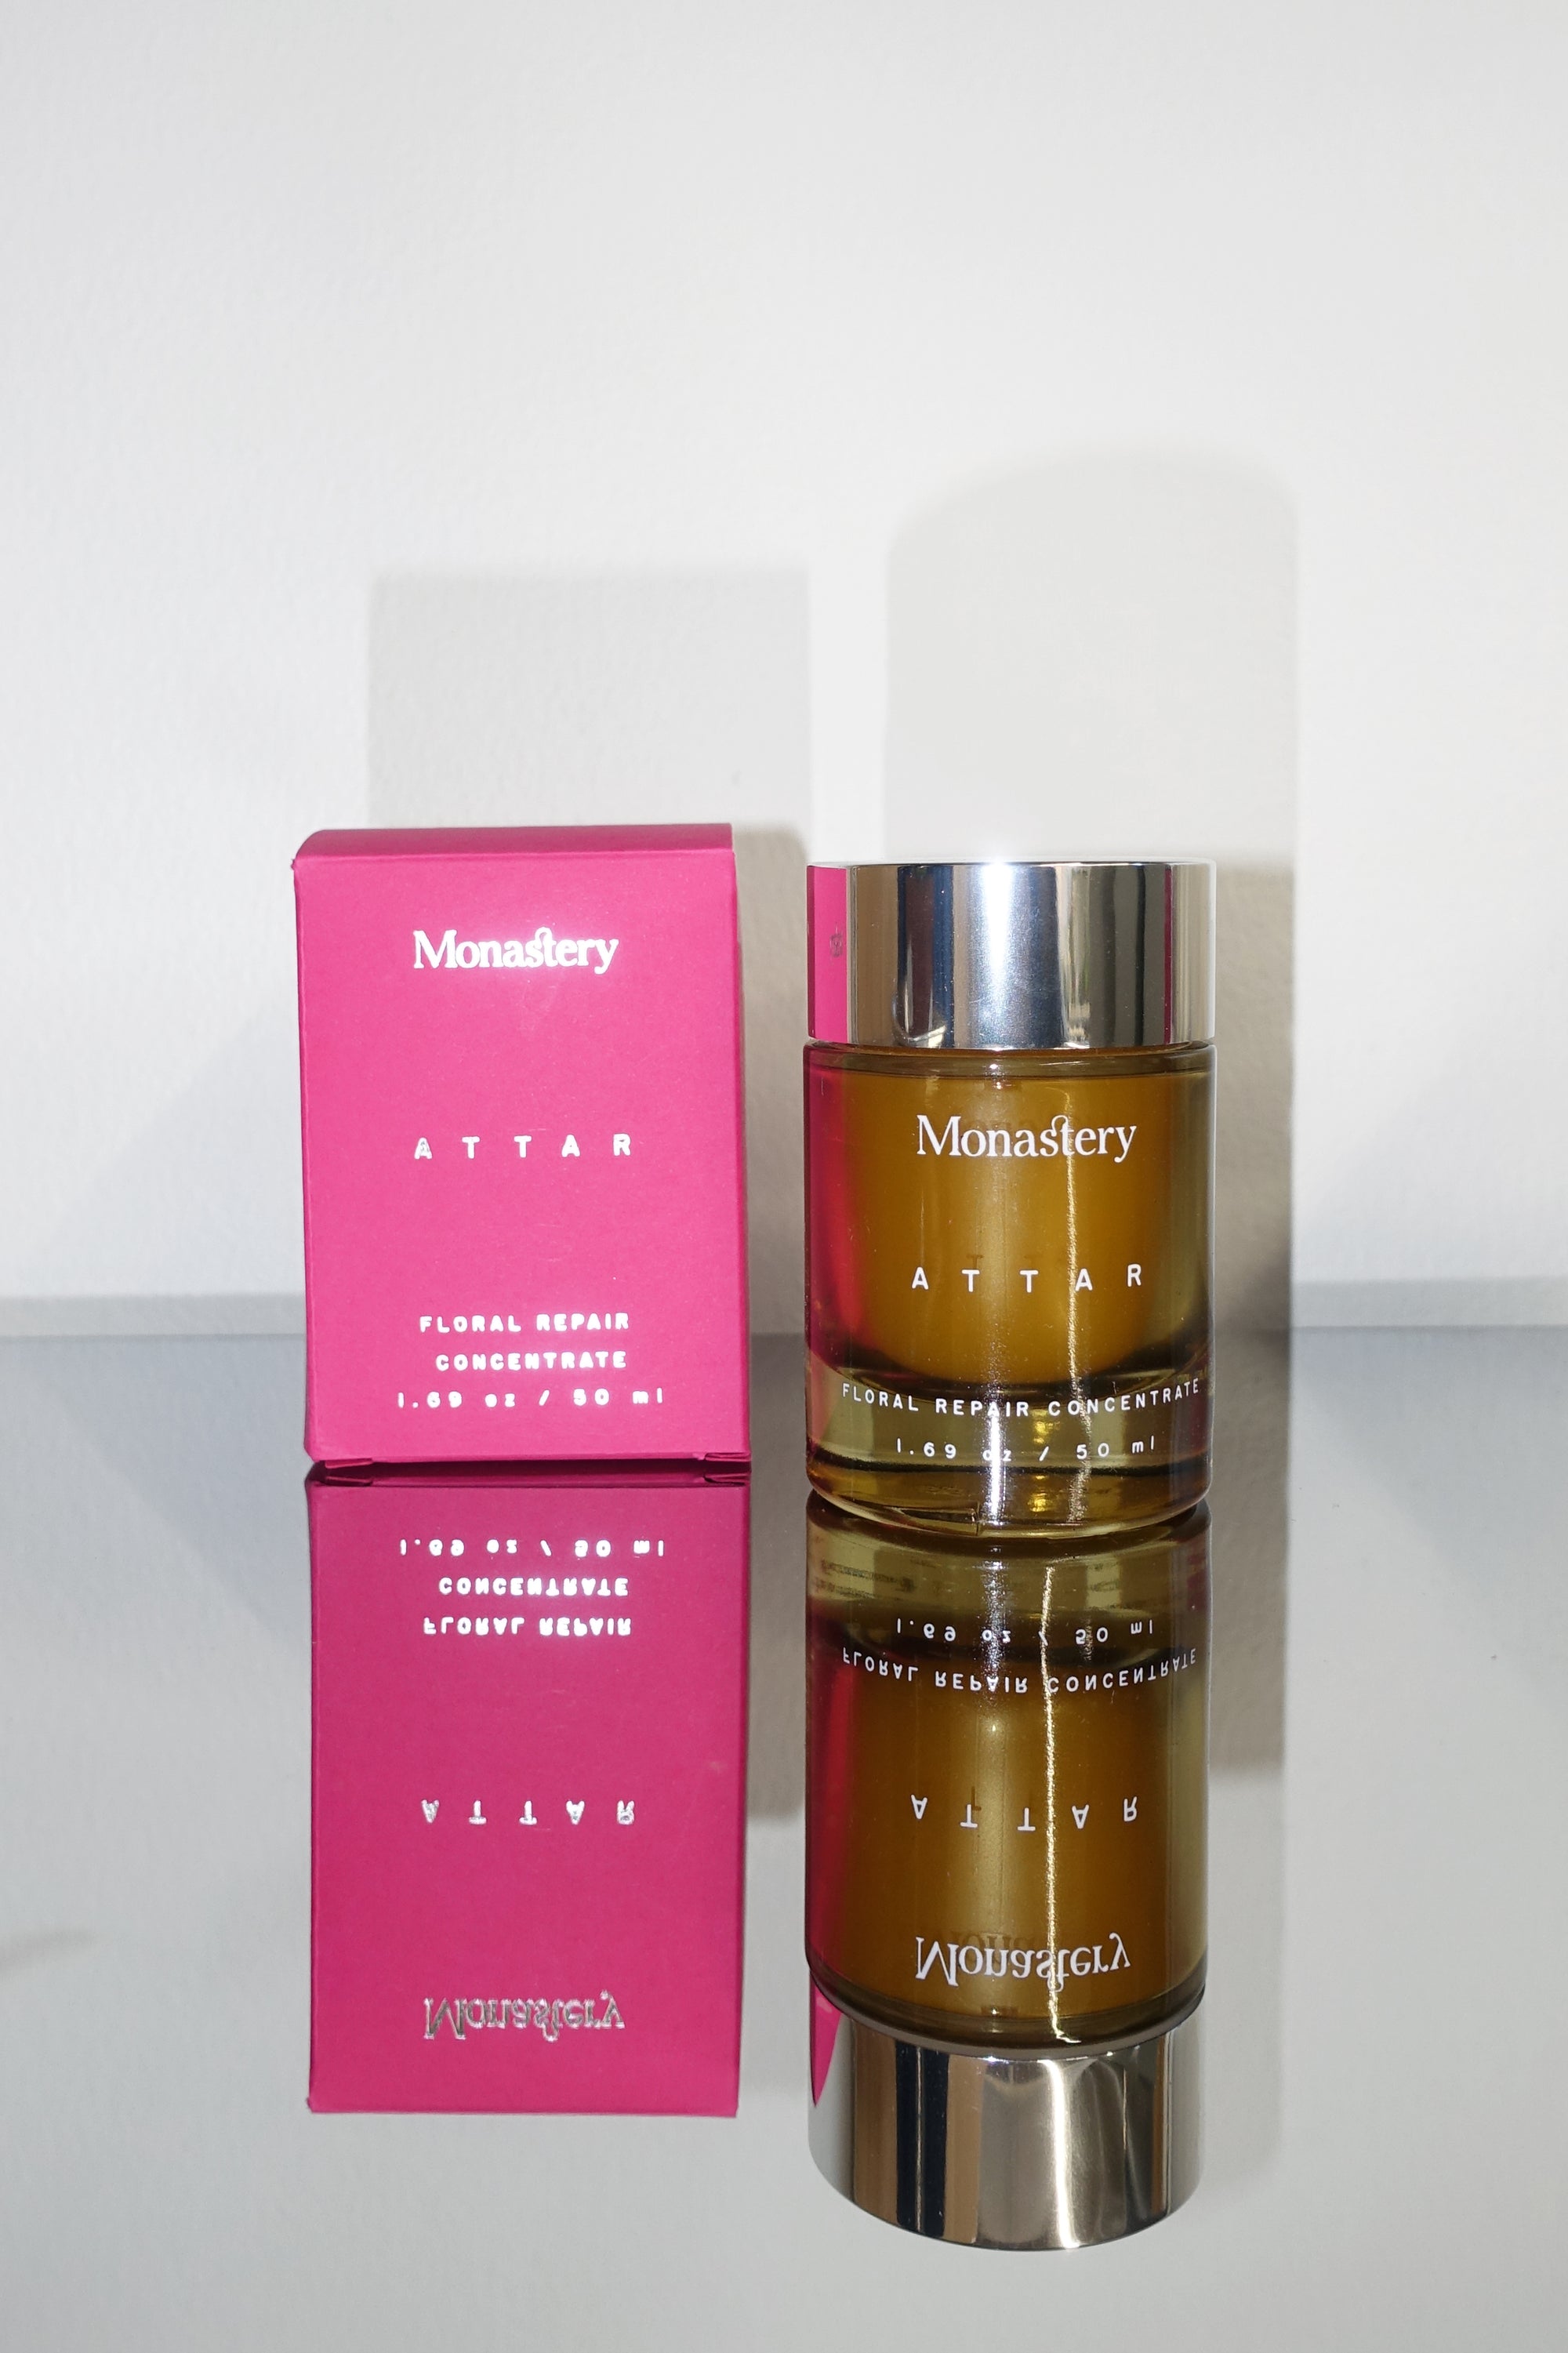 Attar: Botanical Repair Concentrate by Monastery